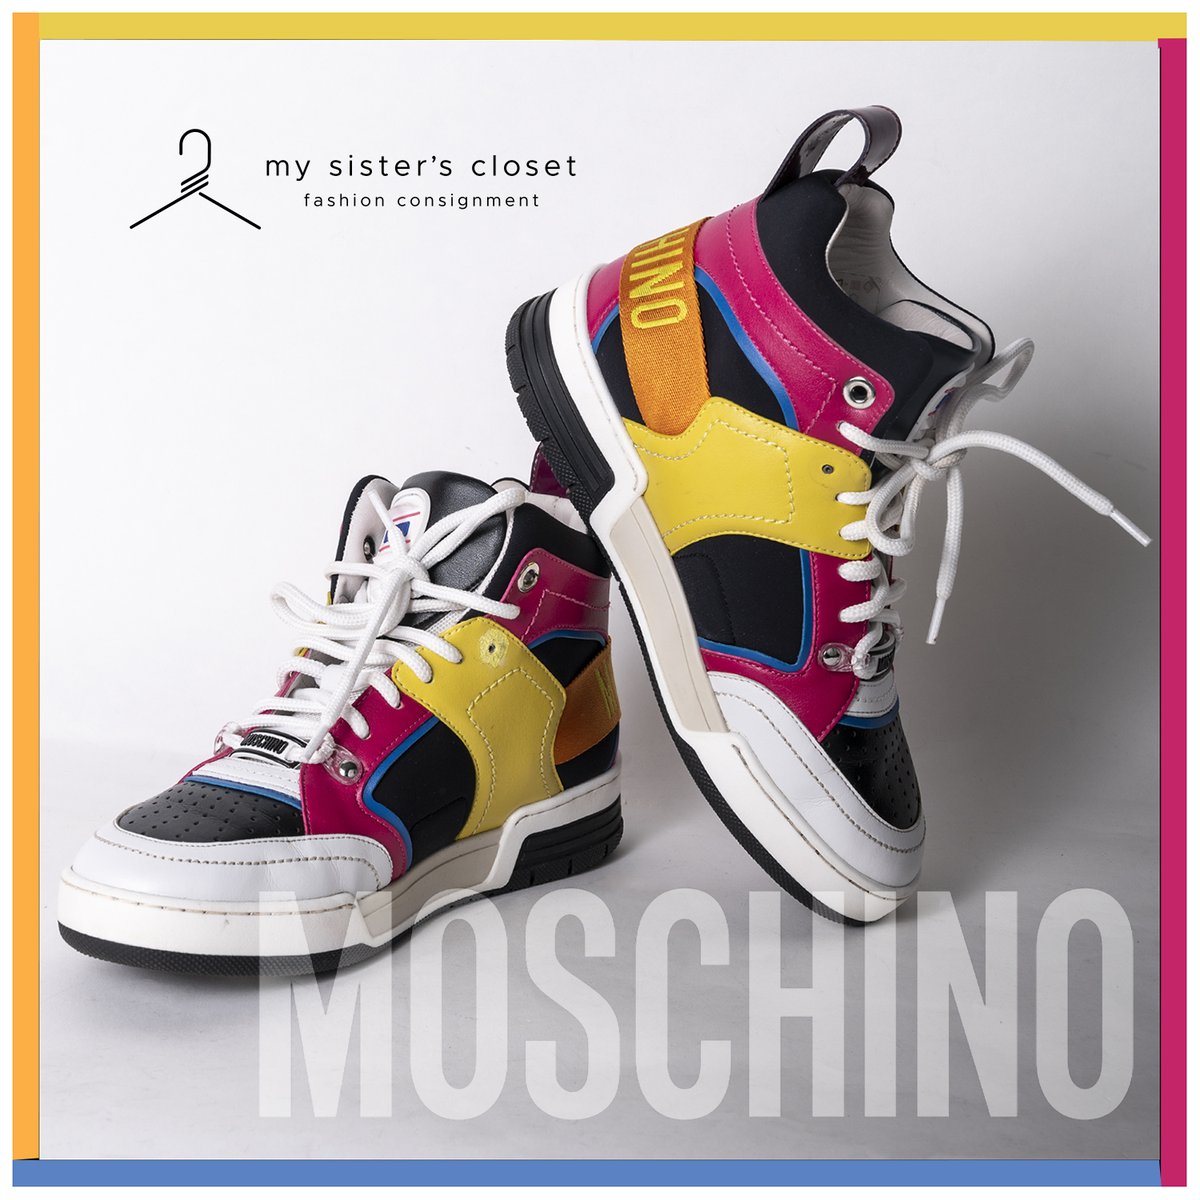 Add some color to your closet with this pair of Moschino sneakers!

Shop online at mysisterscloset.com.

#moschino #sneakers #designersneakers #designershoes #shoes #consign #consignment #designer #mysisterscloset #localaz